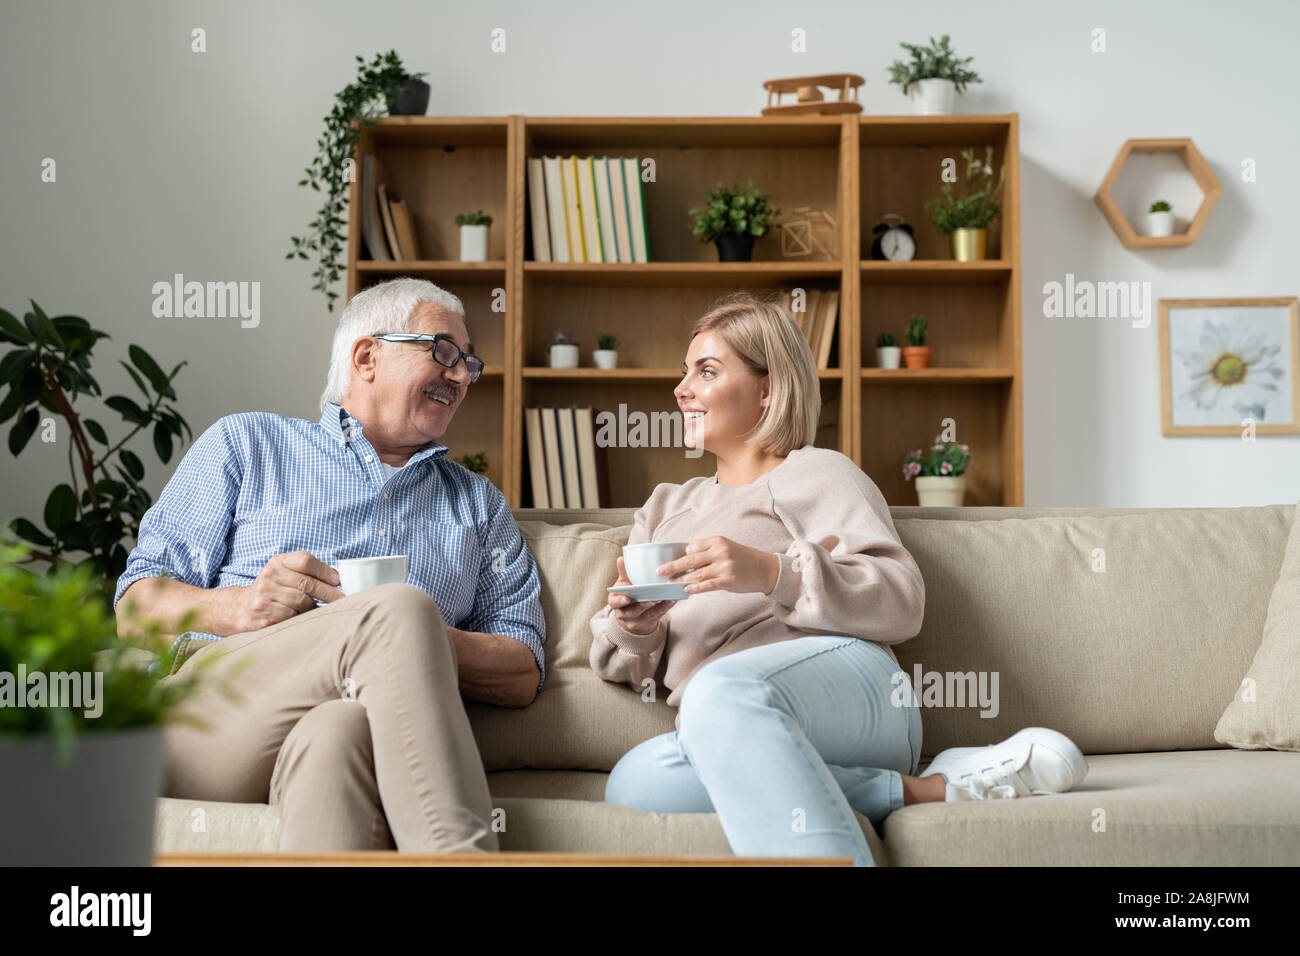 Young female and her father having tea while relaxing and chatting on couch Stock Photo